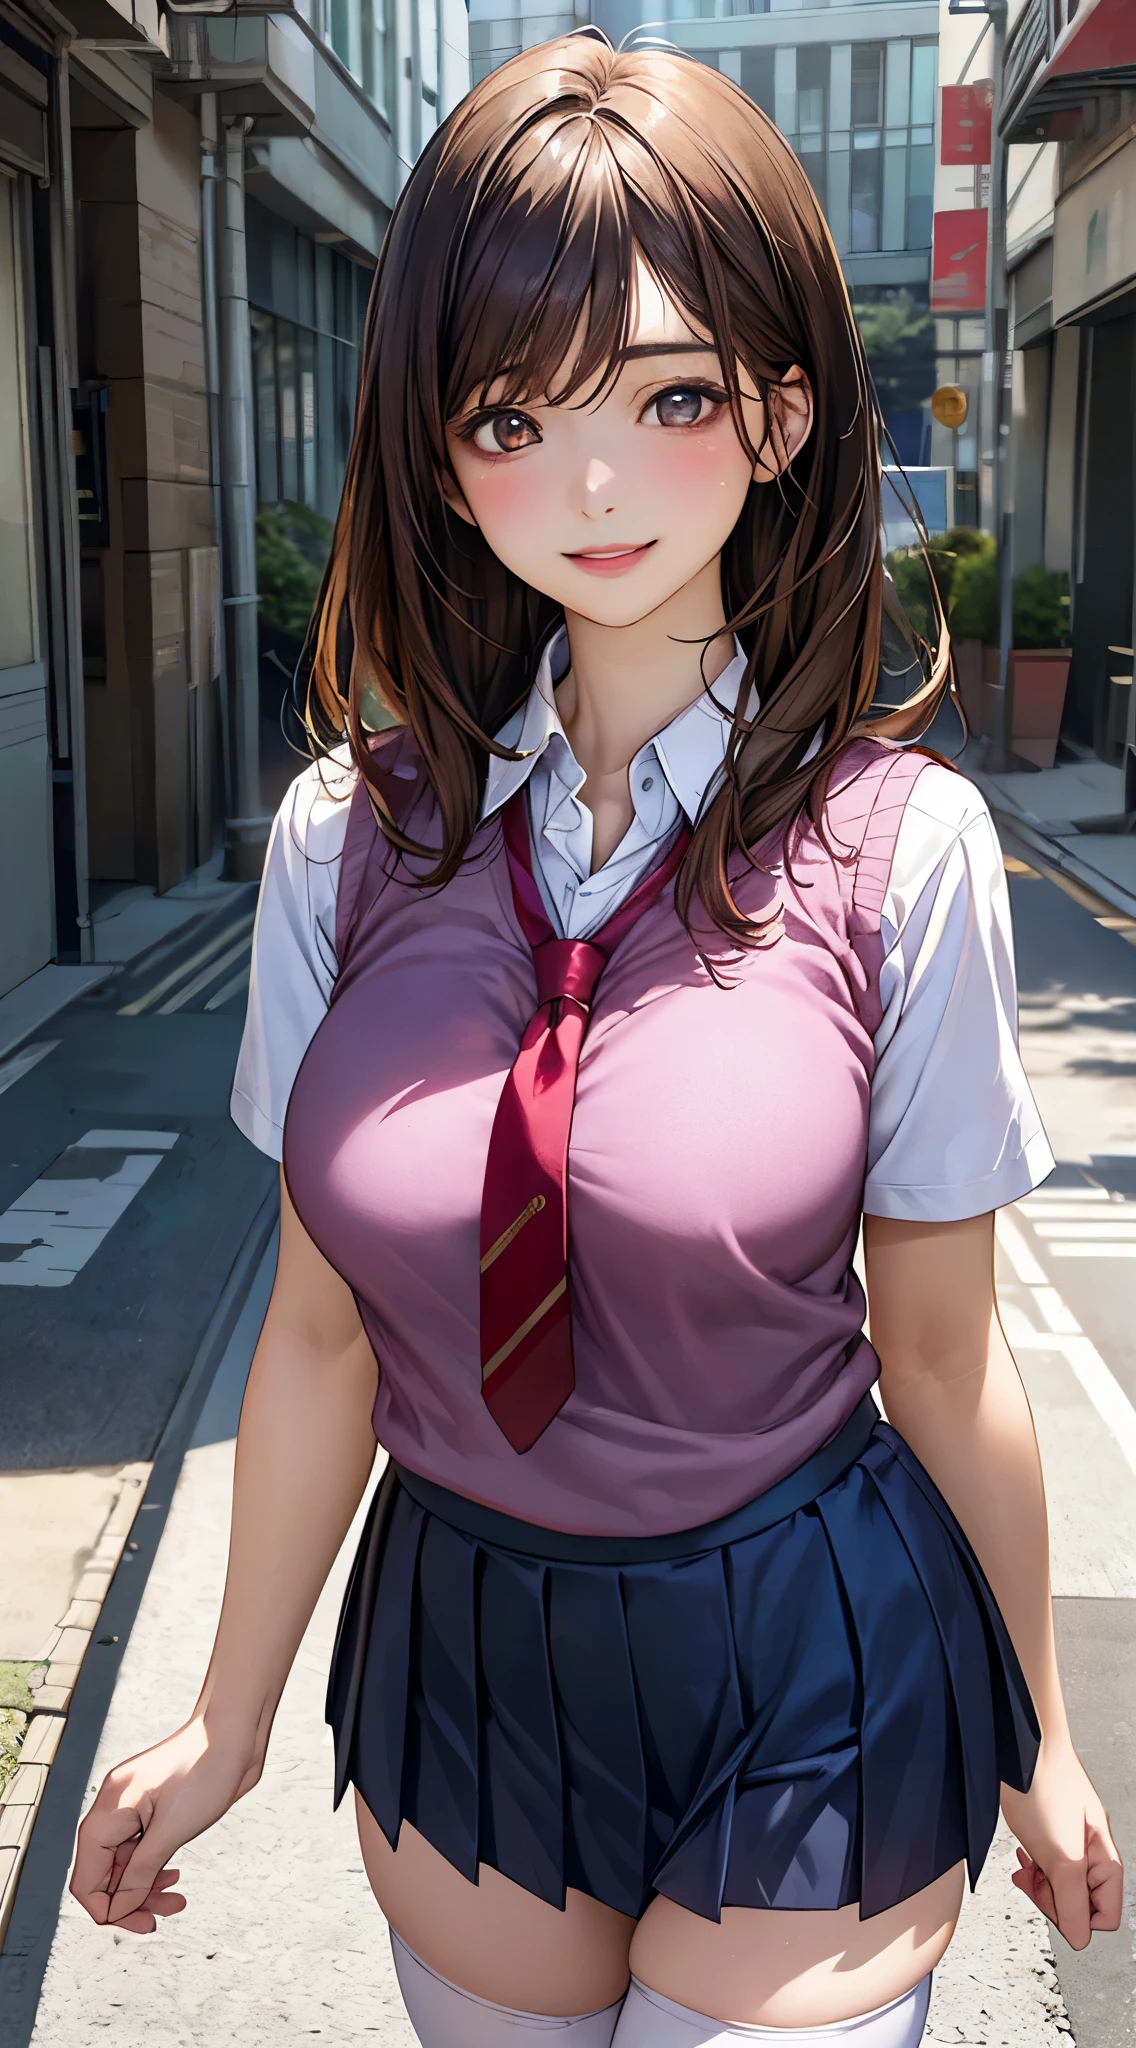 Anime girl in school uniform posing for a picture in a city - SeaArt AI